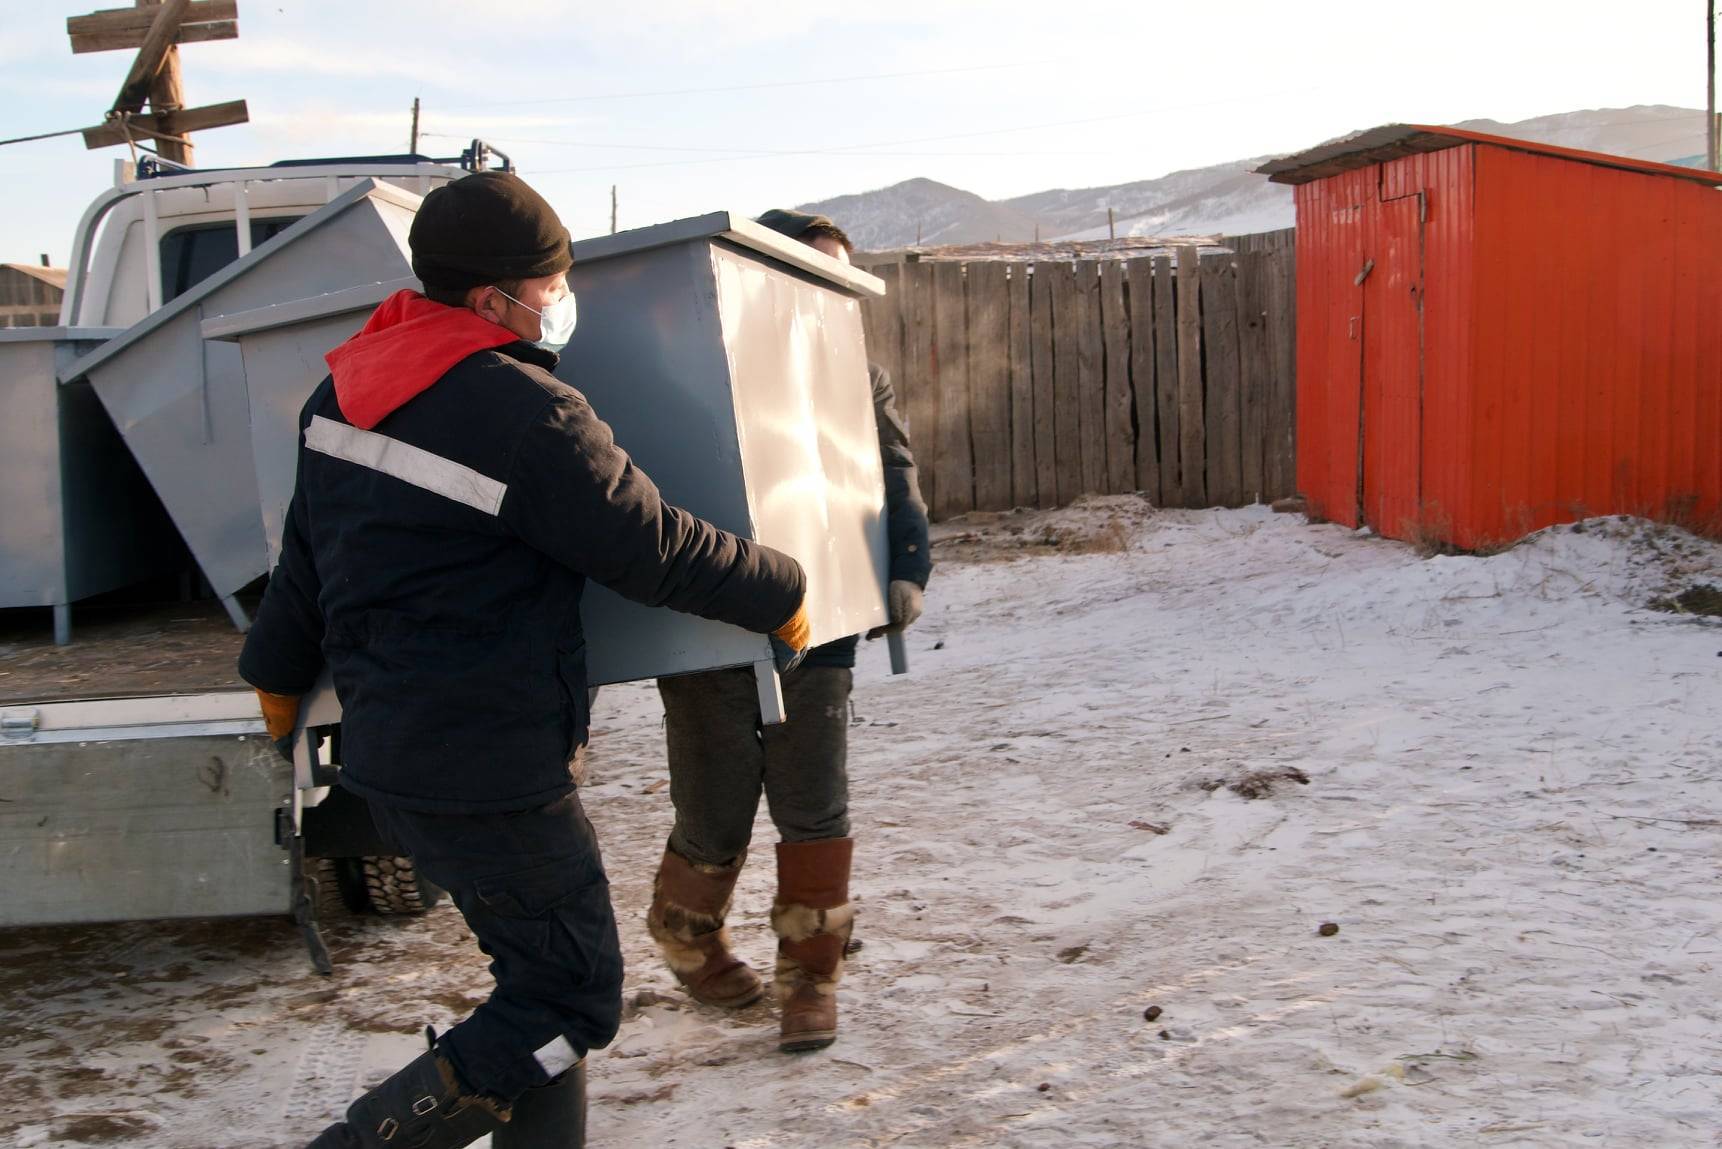 Mongolia is Helping Communities Reduce Plastic Pollution by Taking Action On Waste